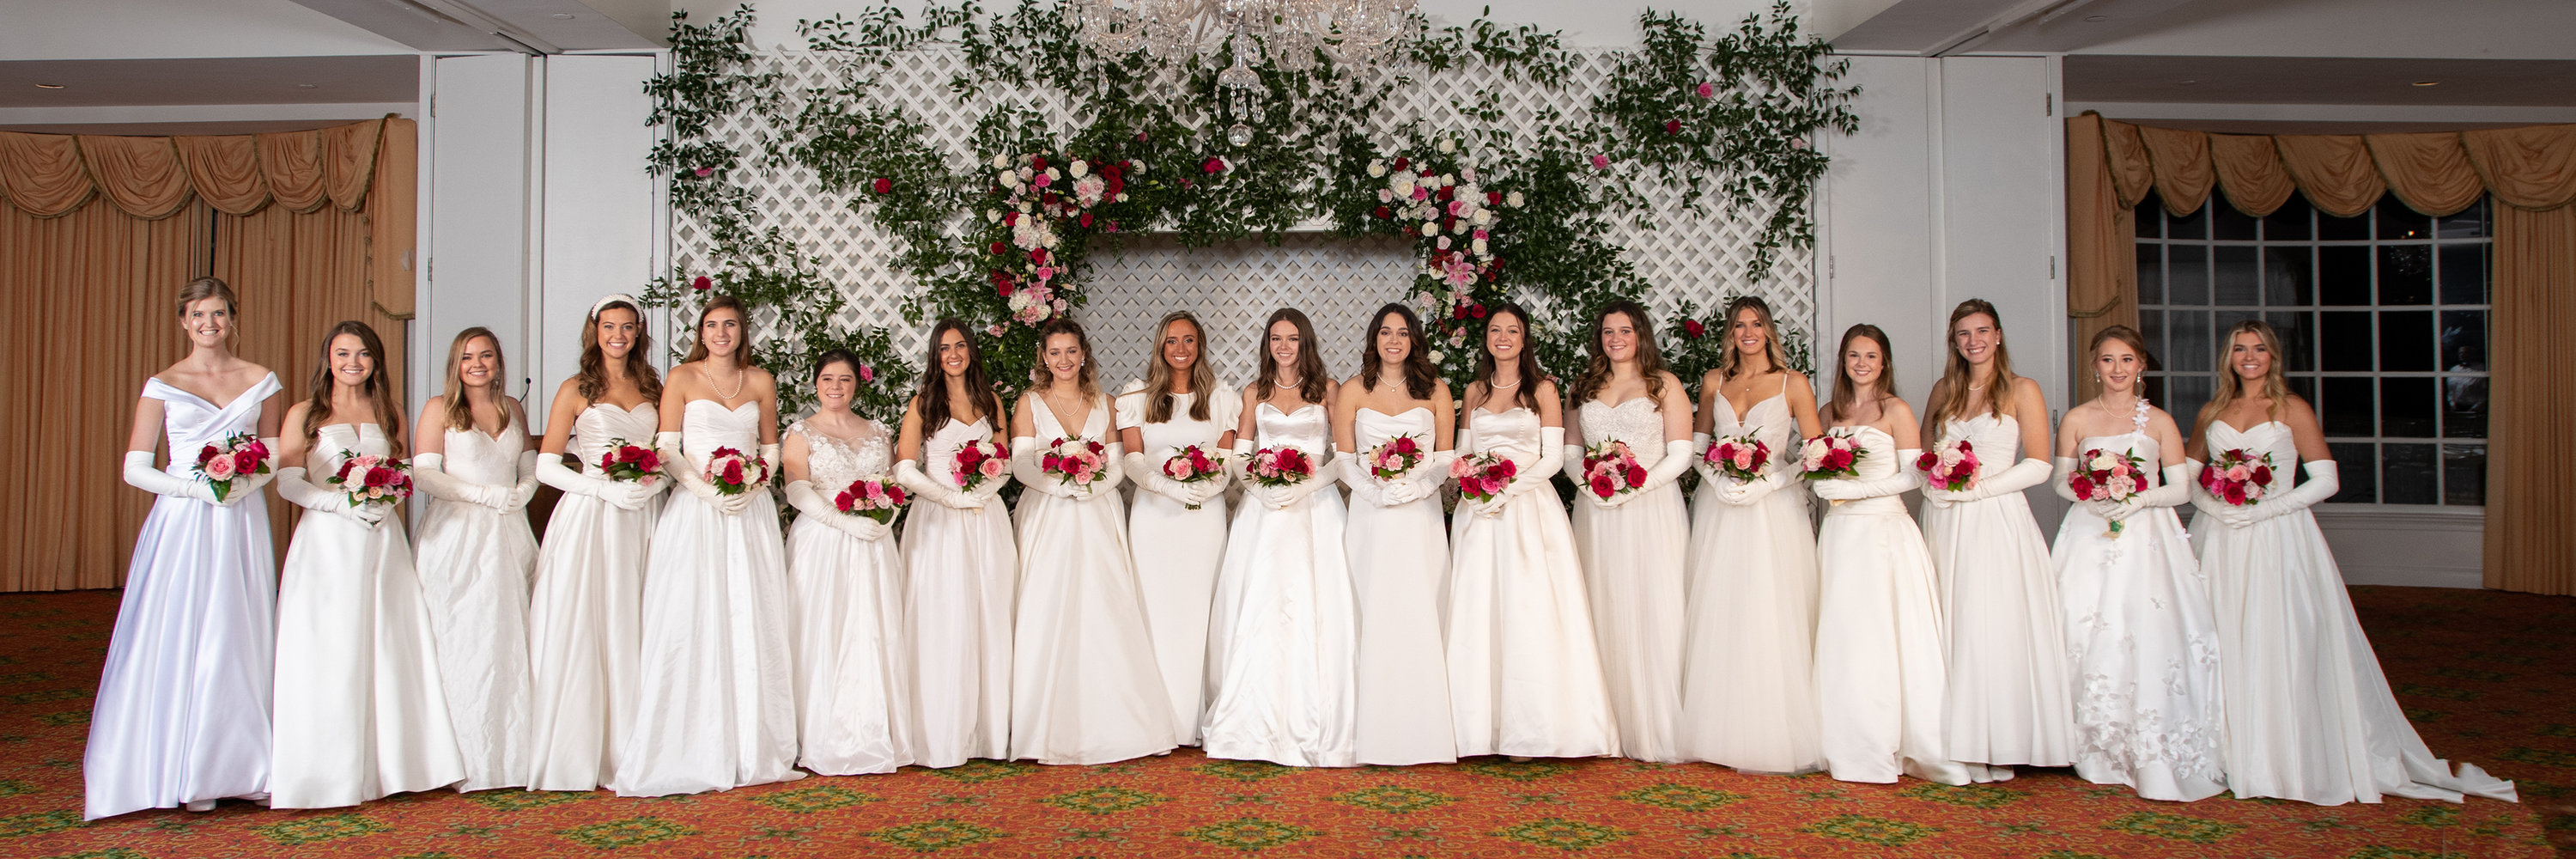 Debutante Committee of WinstonSalem Holds 59th Annual Presentation and